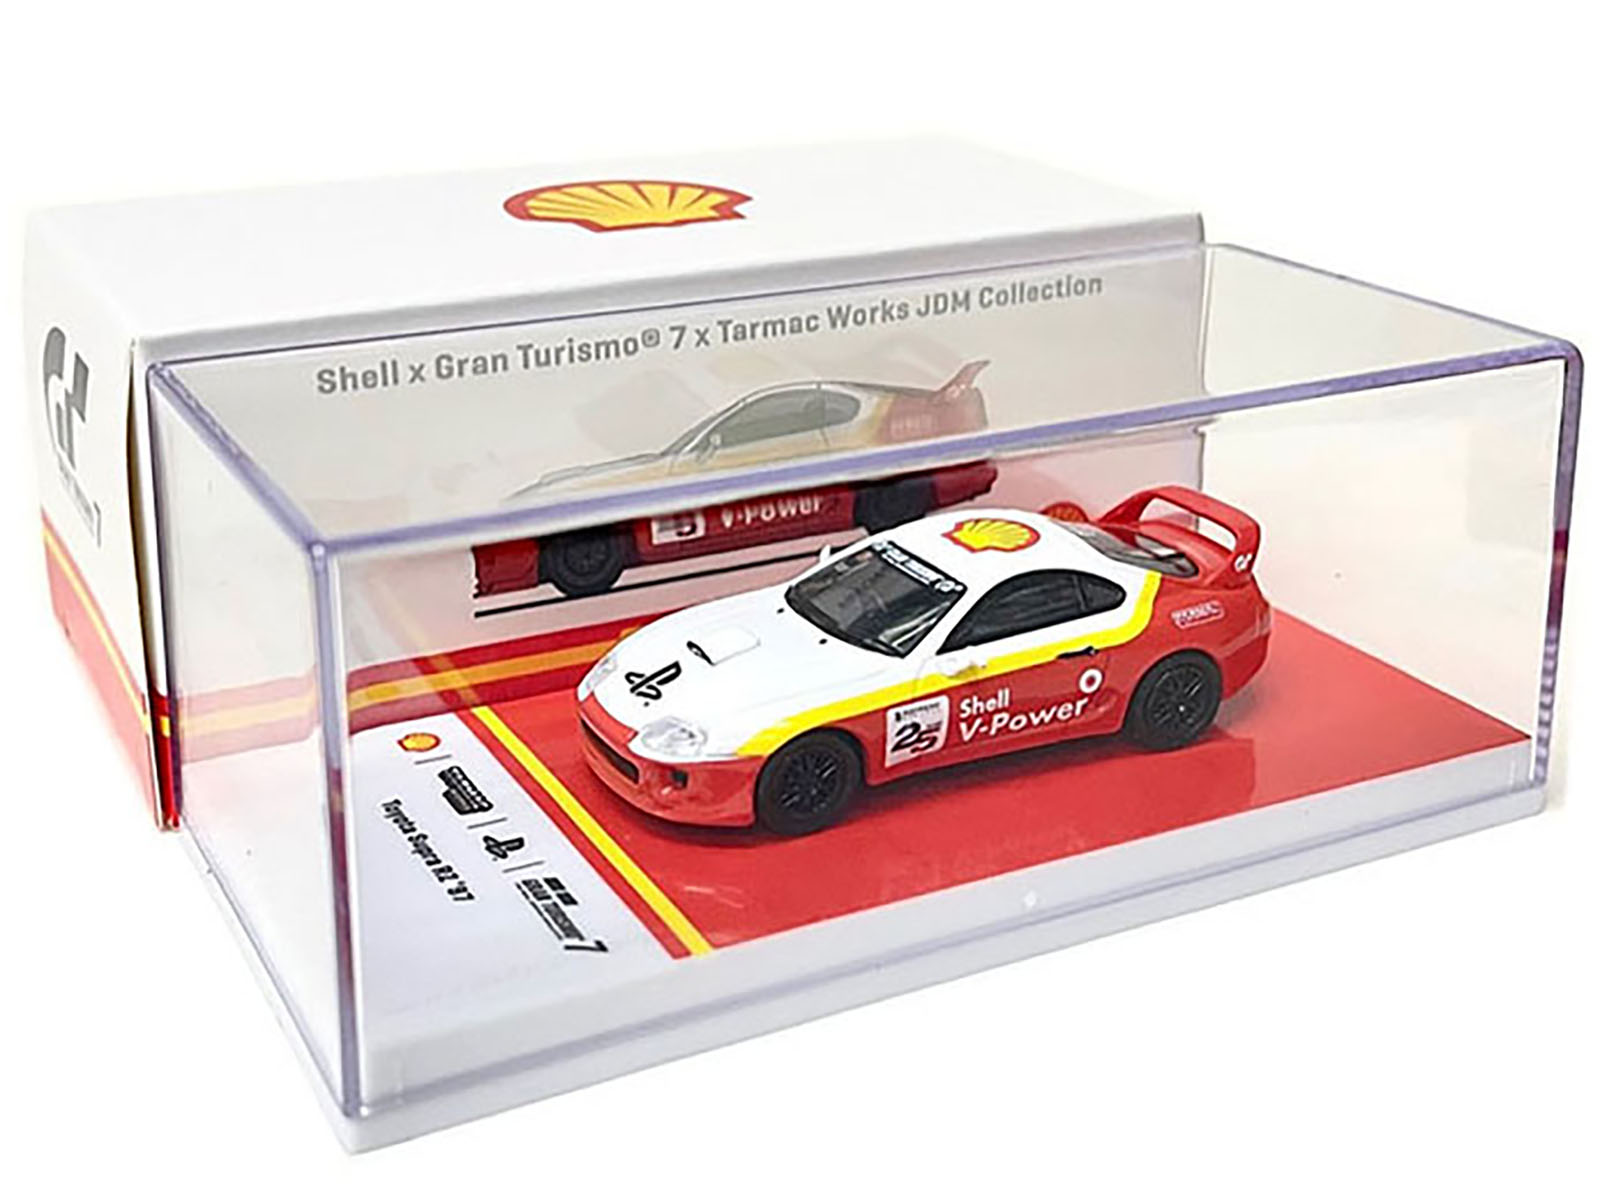 Diecast 1997 Toyota Supra RZ RHD (Right Hand Drive) Red and White with  Yellow Stripes Shell x Gran Turismo 7 Special Edition 1/64 Diecast Model  Car by Tarmac Works 